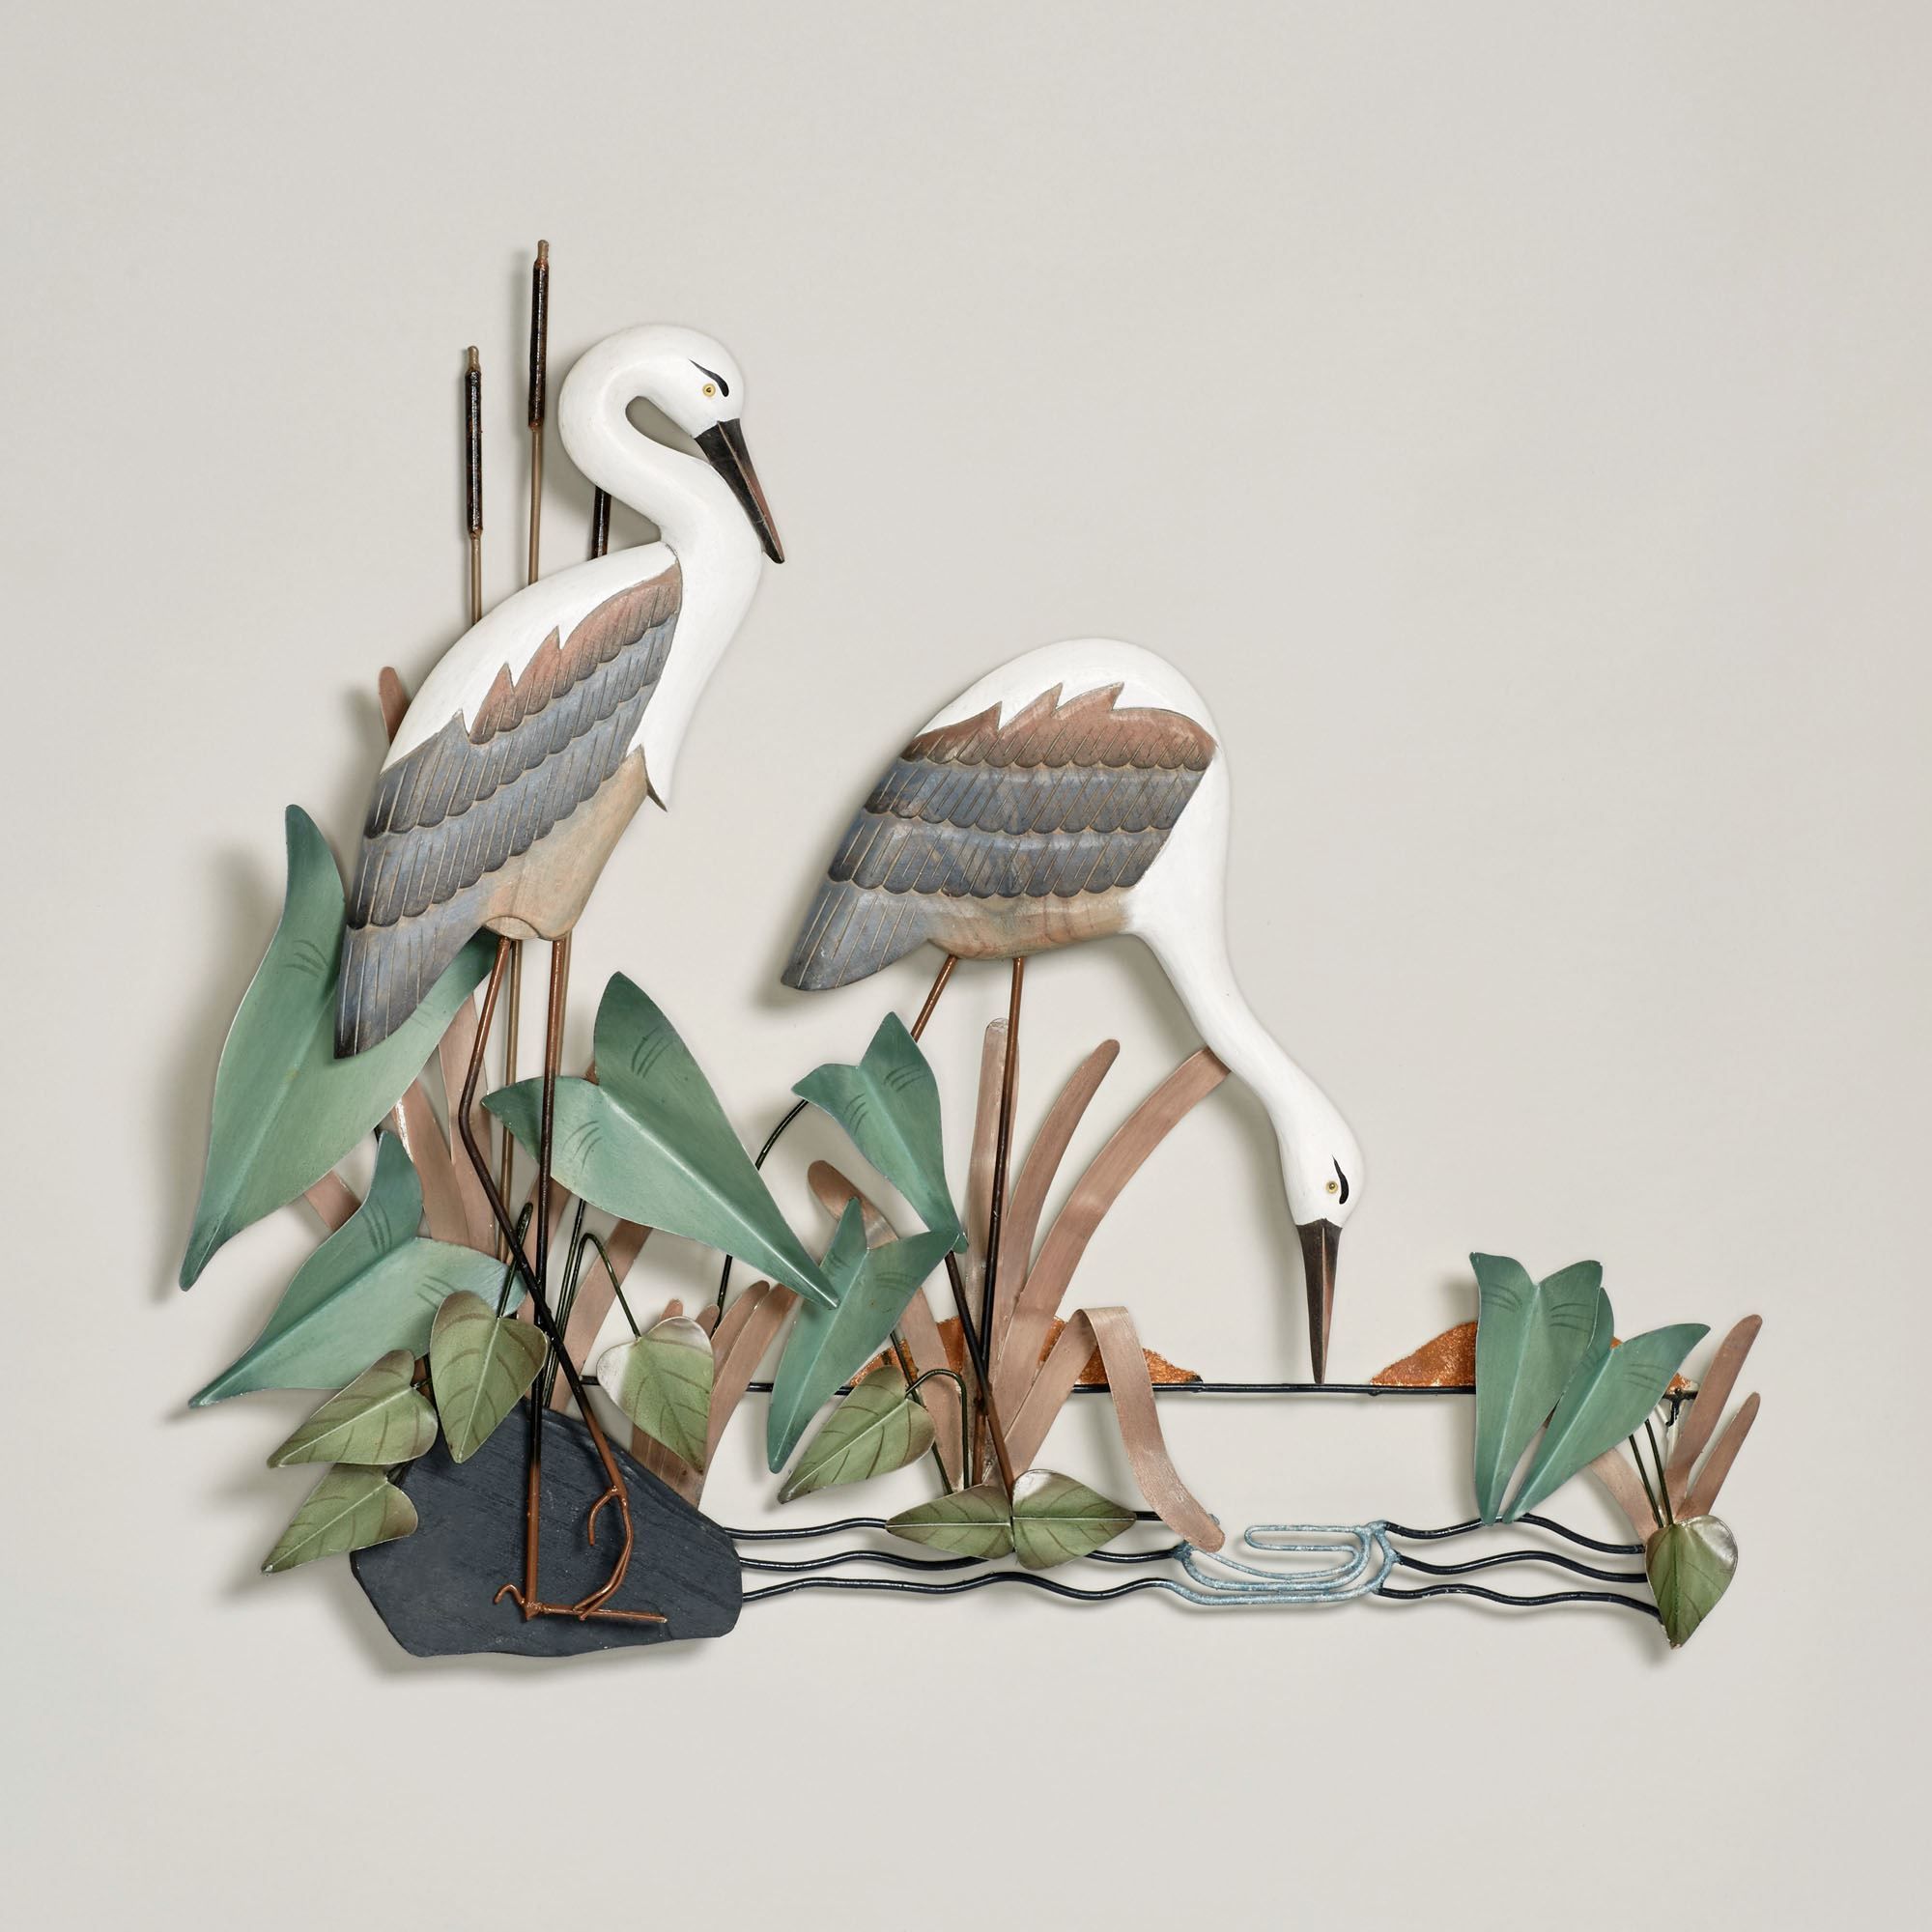 Heron Pair Wall Sculpture Pertaining To Most Current Heron Bird Wall Art (View 13 of 20)